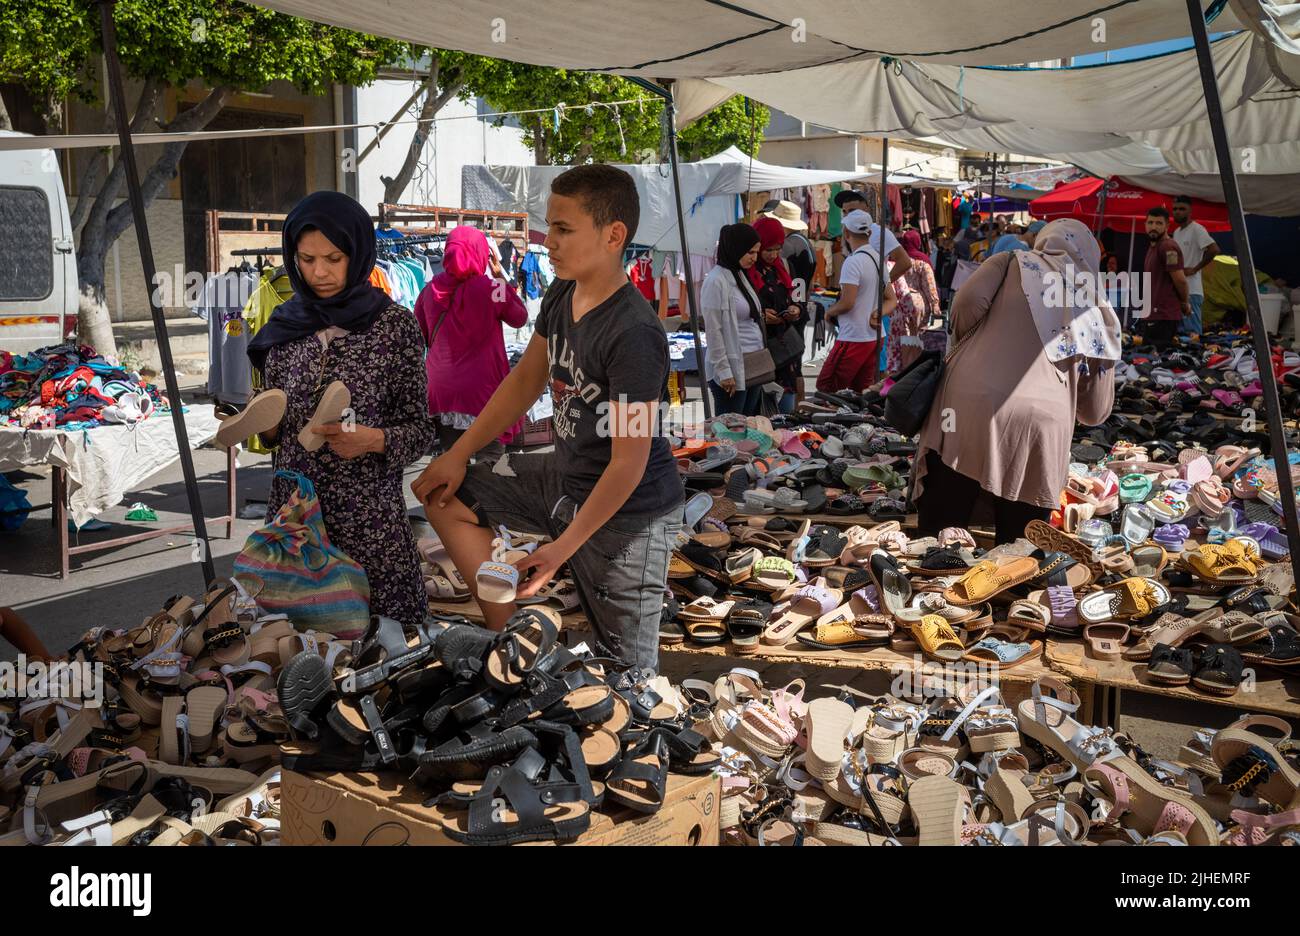 A young man sells women's shoes at the Sunday Souk, a weekly market in Sousse, Tunisia. Stock Photo